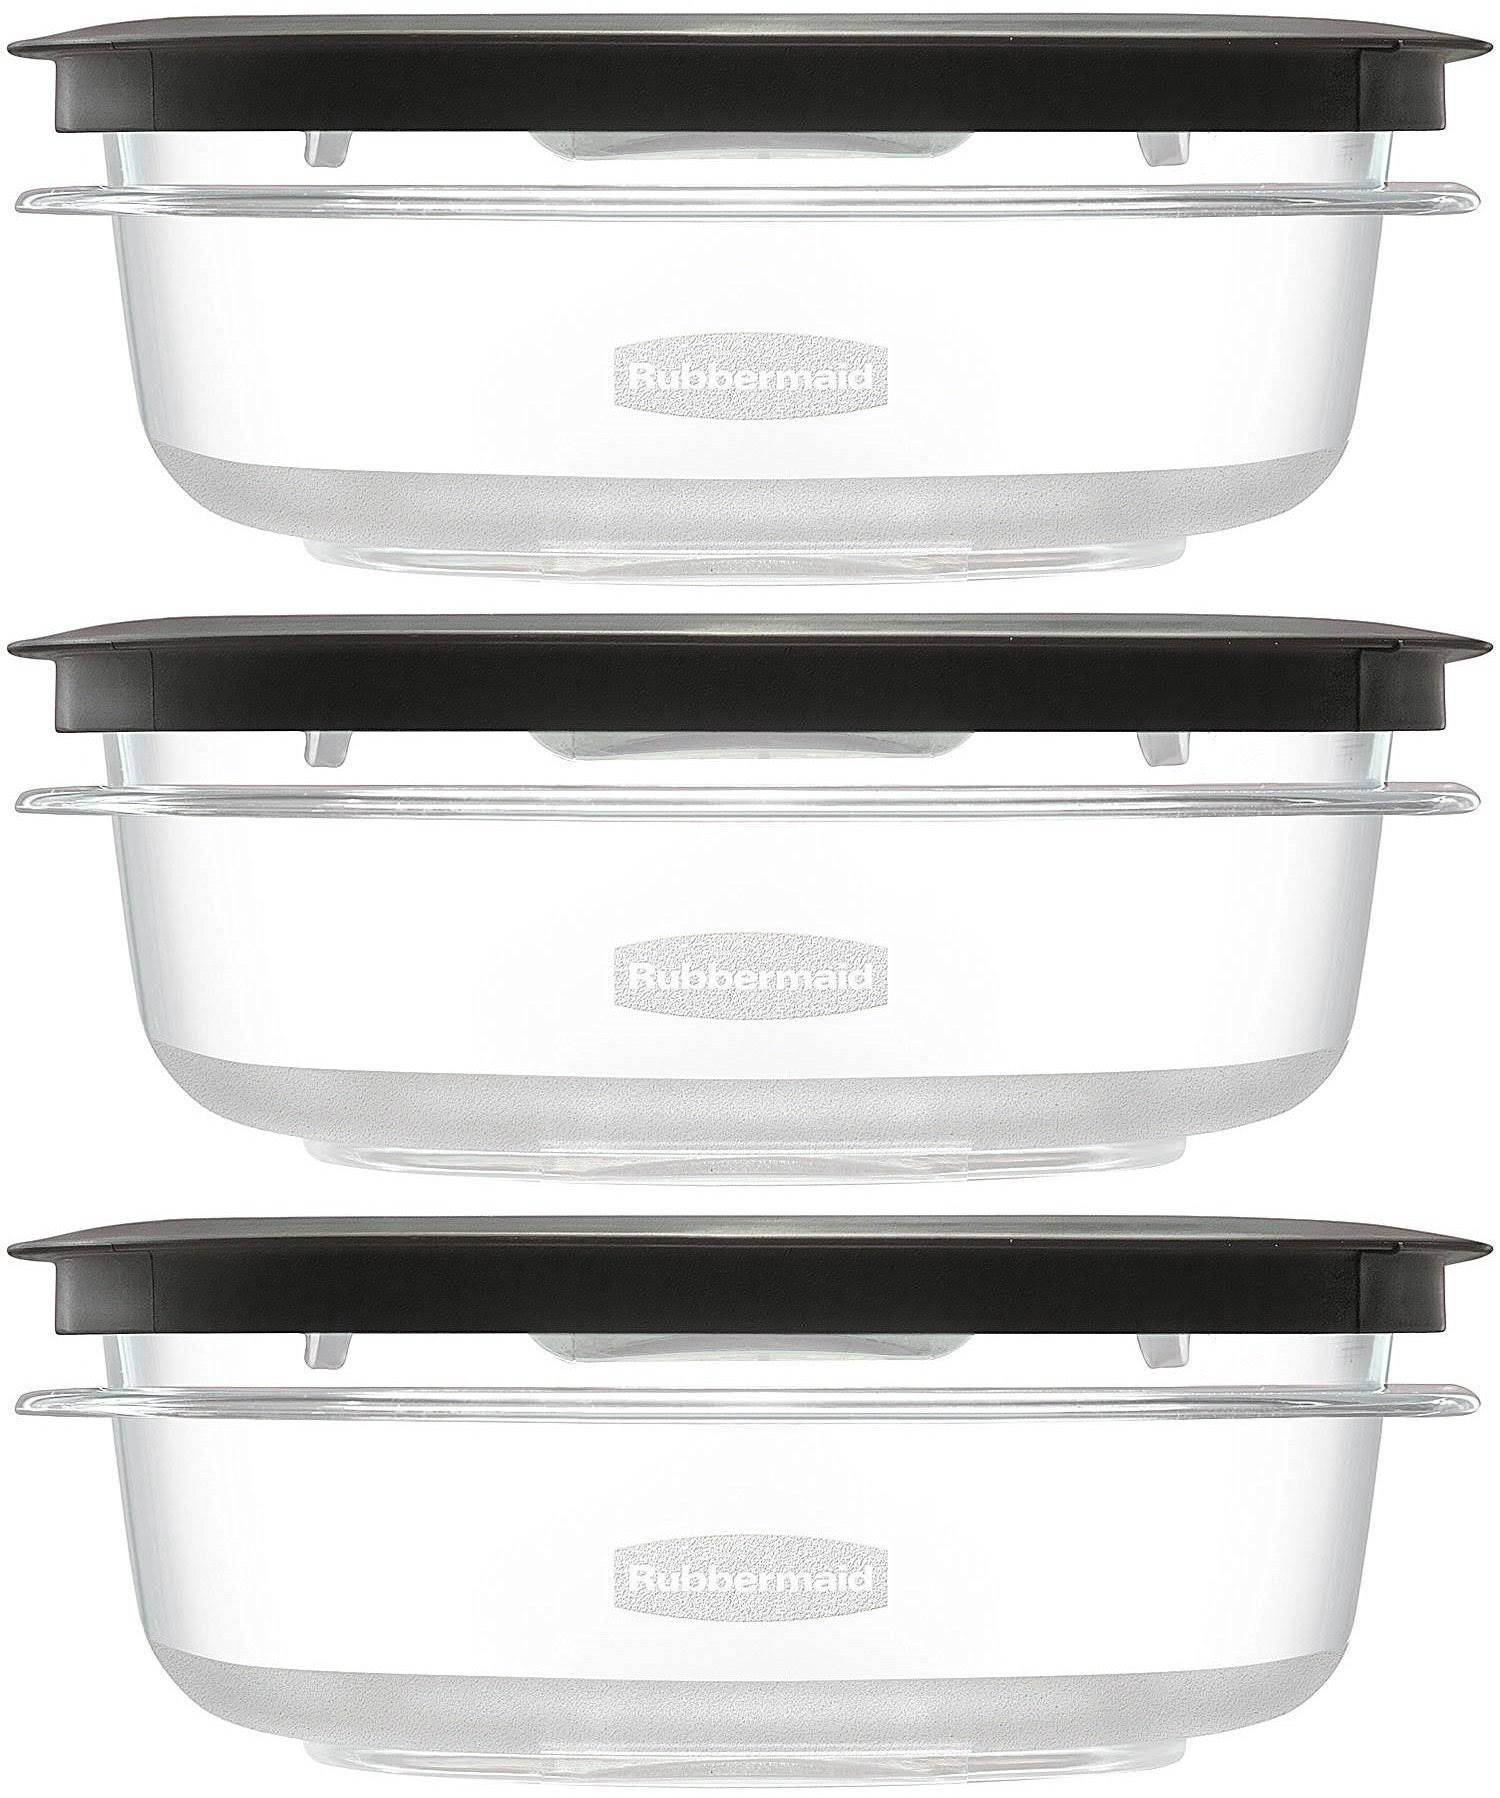 Rubbermaid Premier Stain Shield Food Storage Container